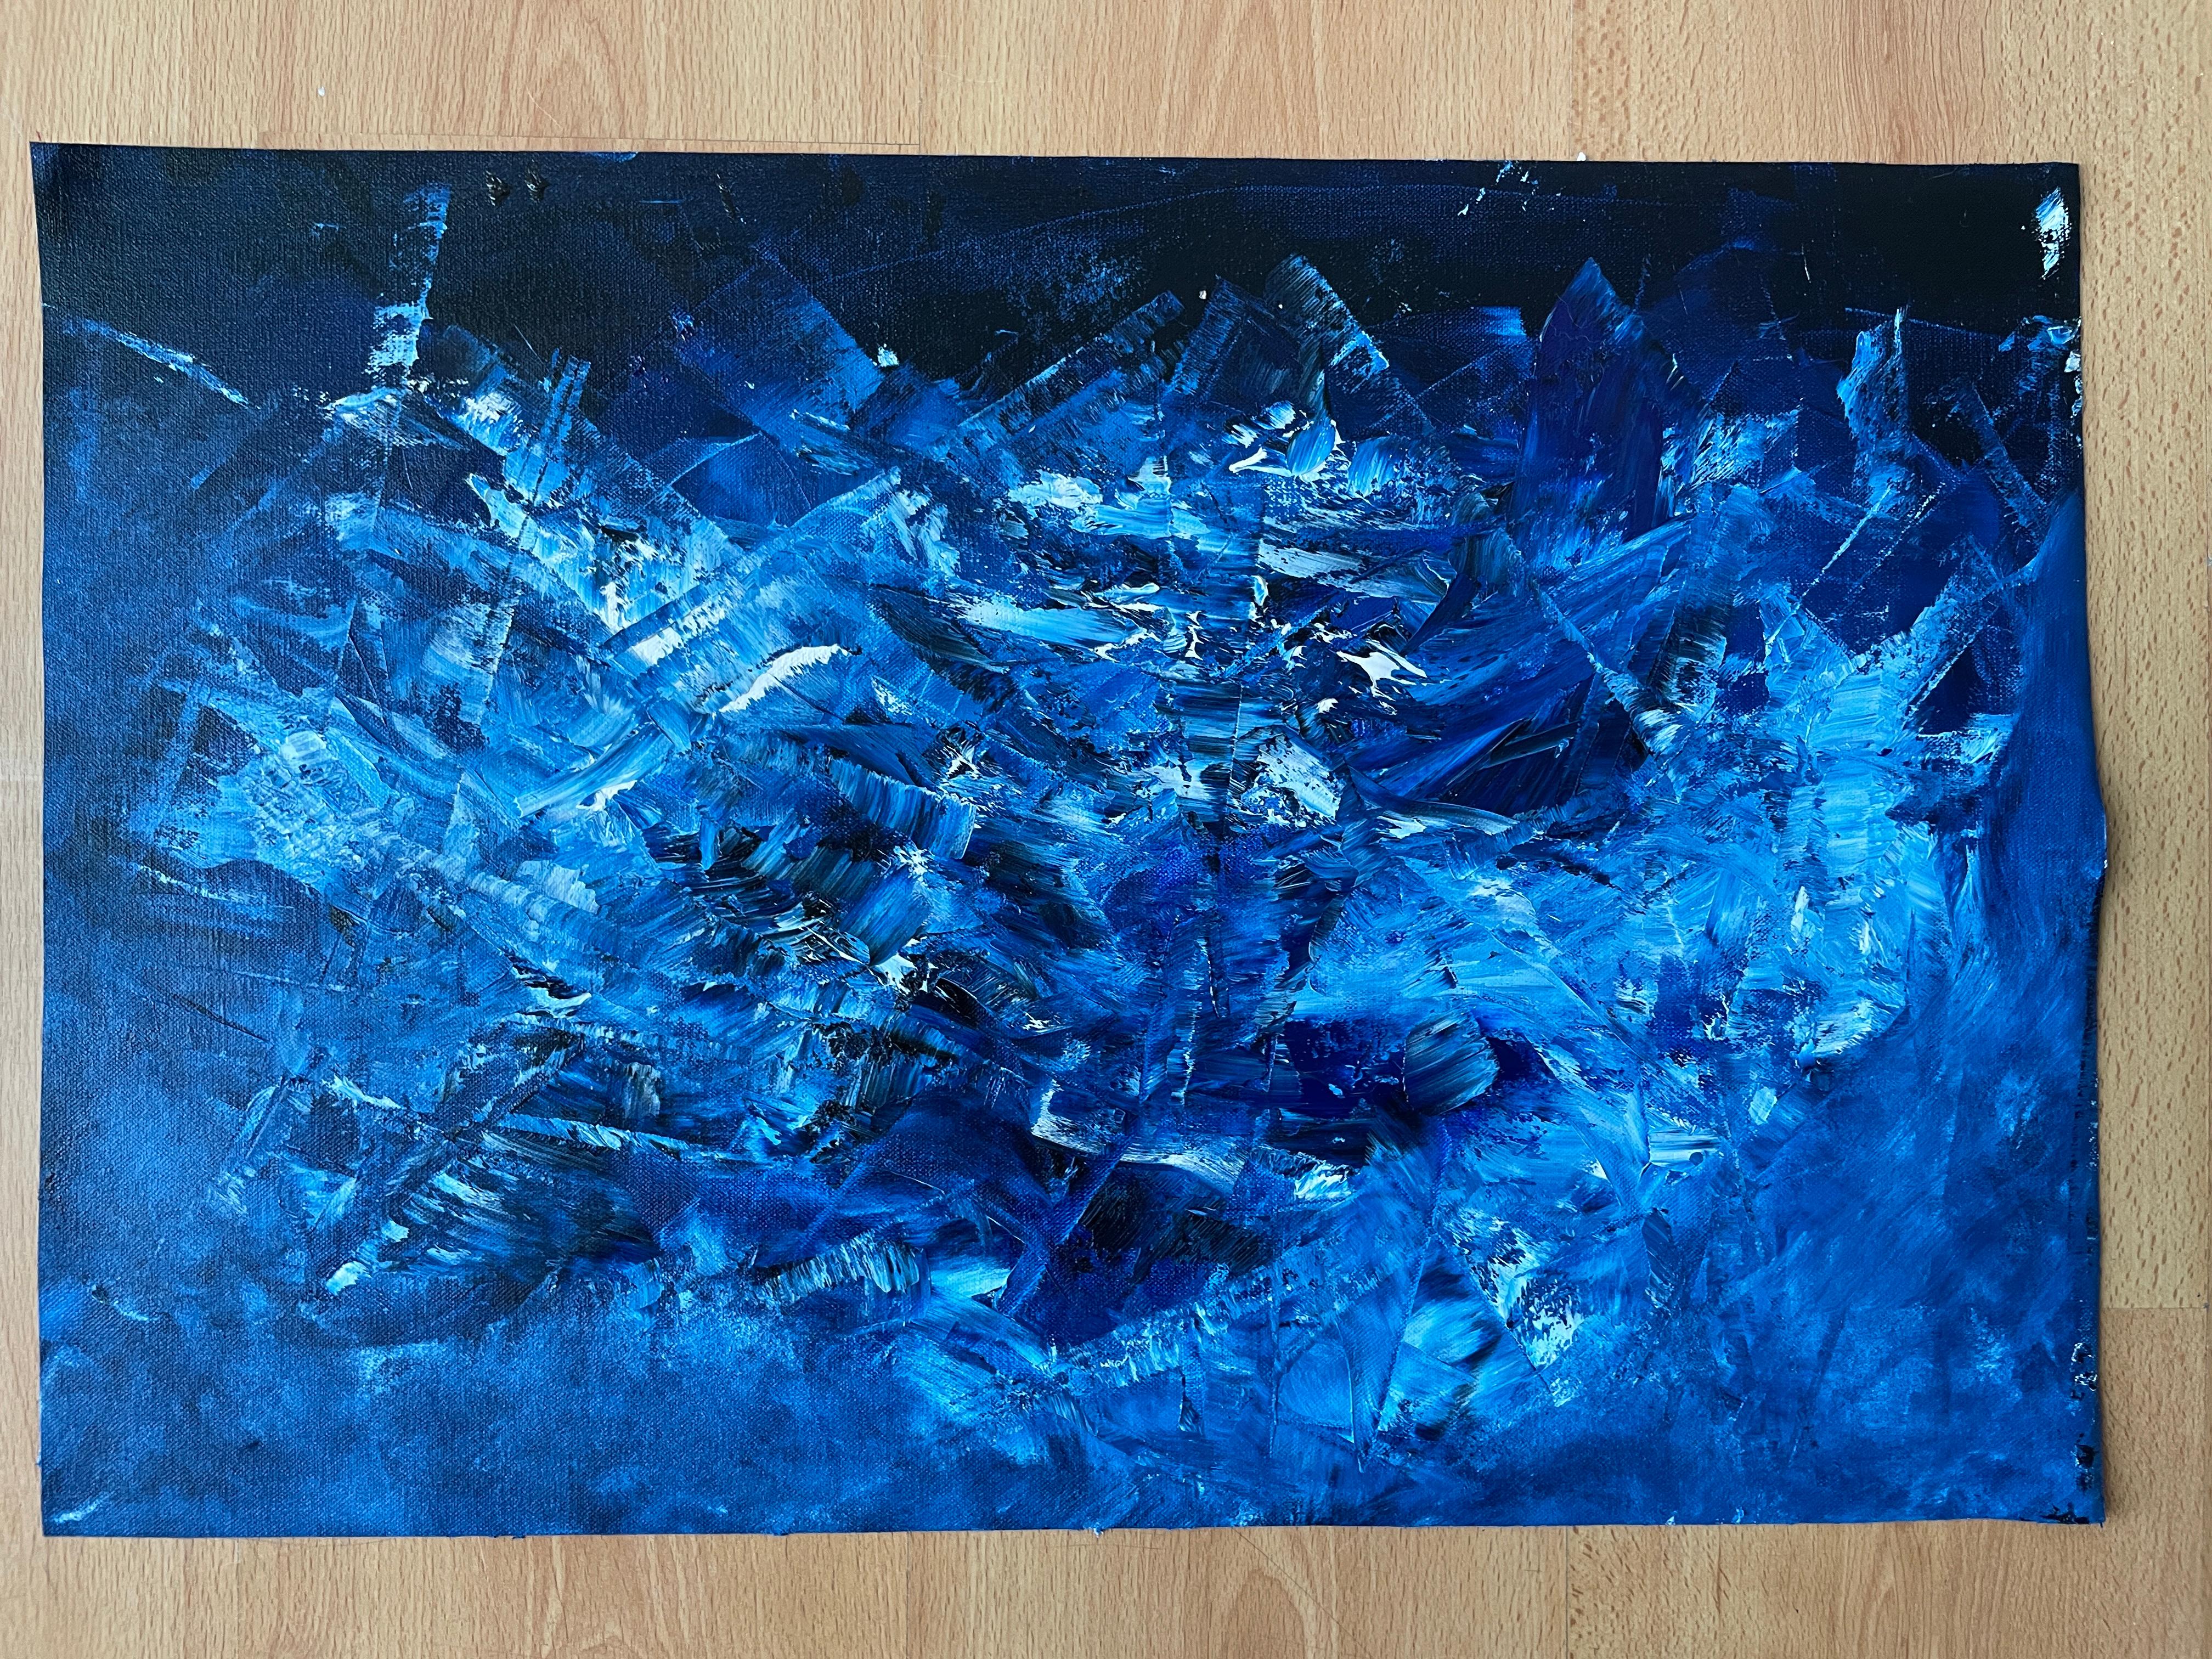 Blue Cosmic 01 - Abstract Expressionist Painting by Juan Jose Garay